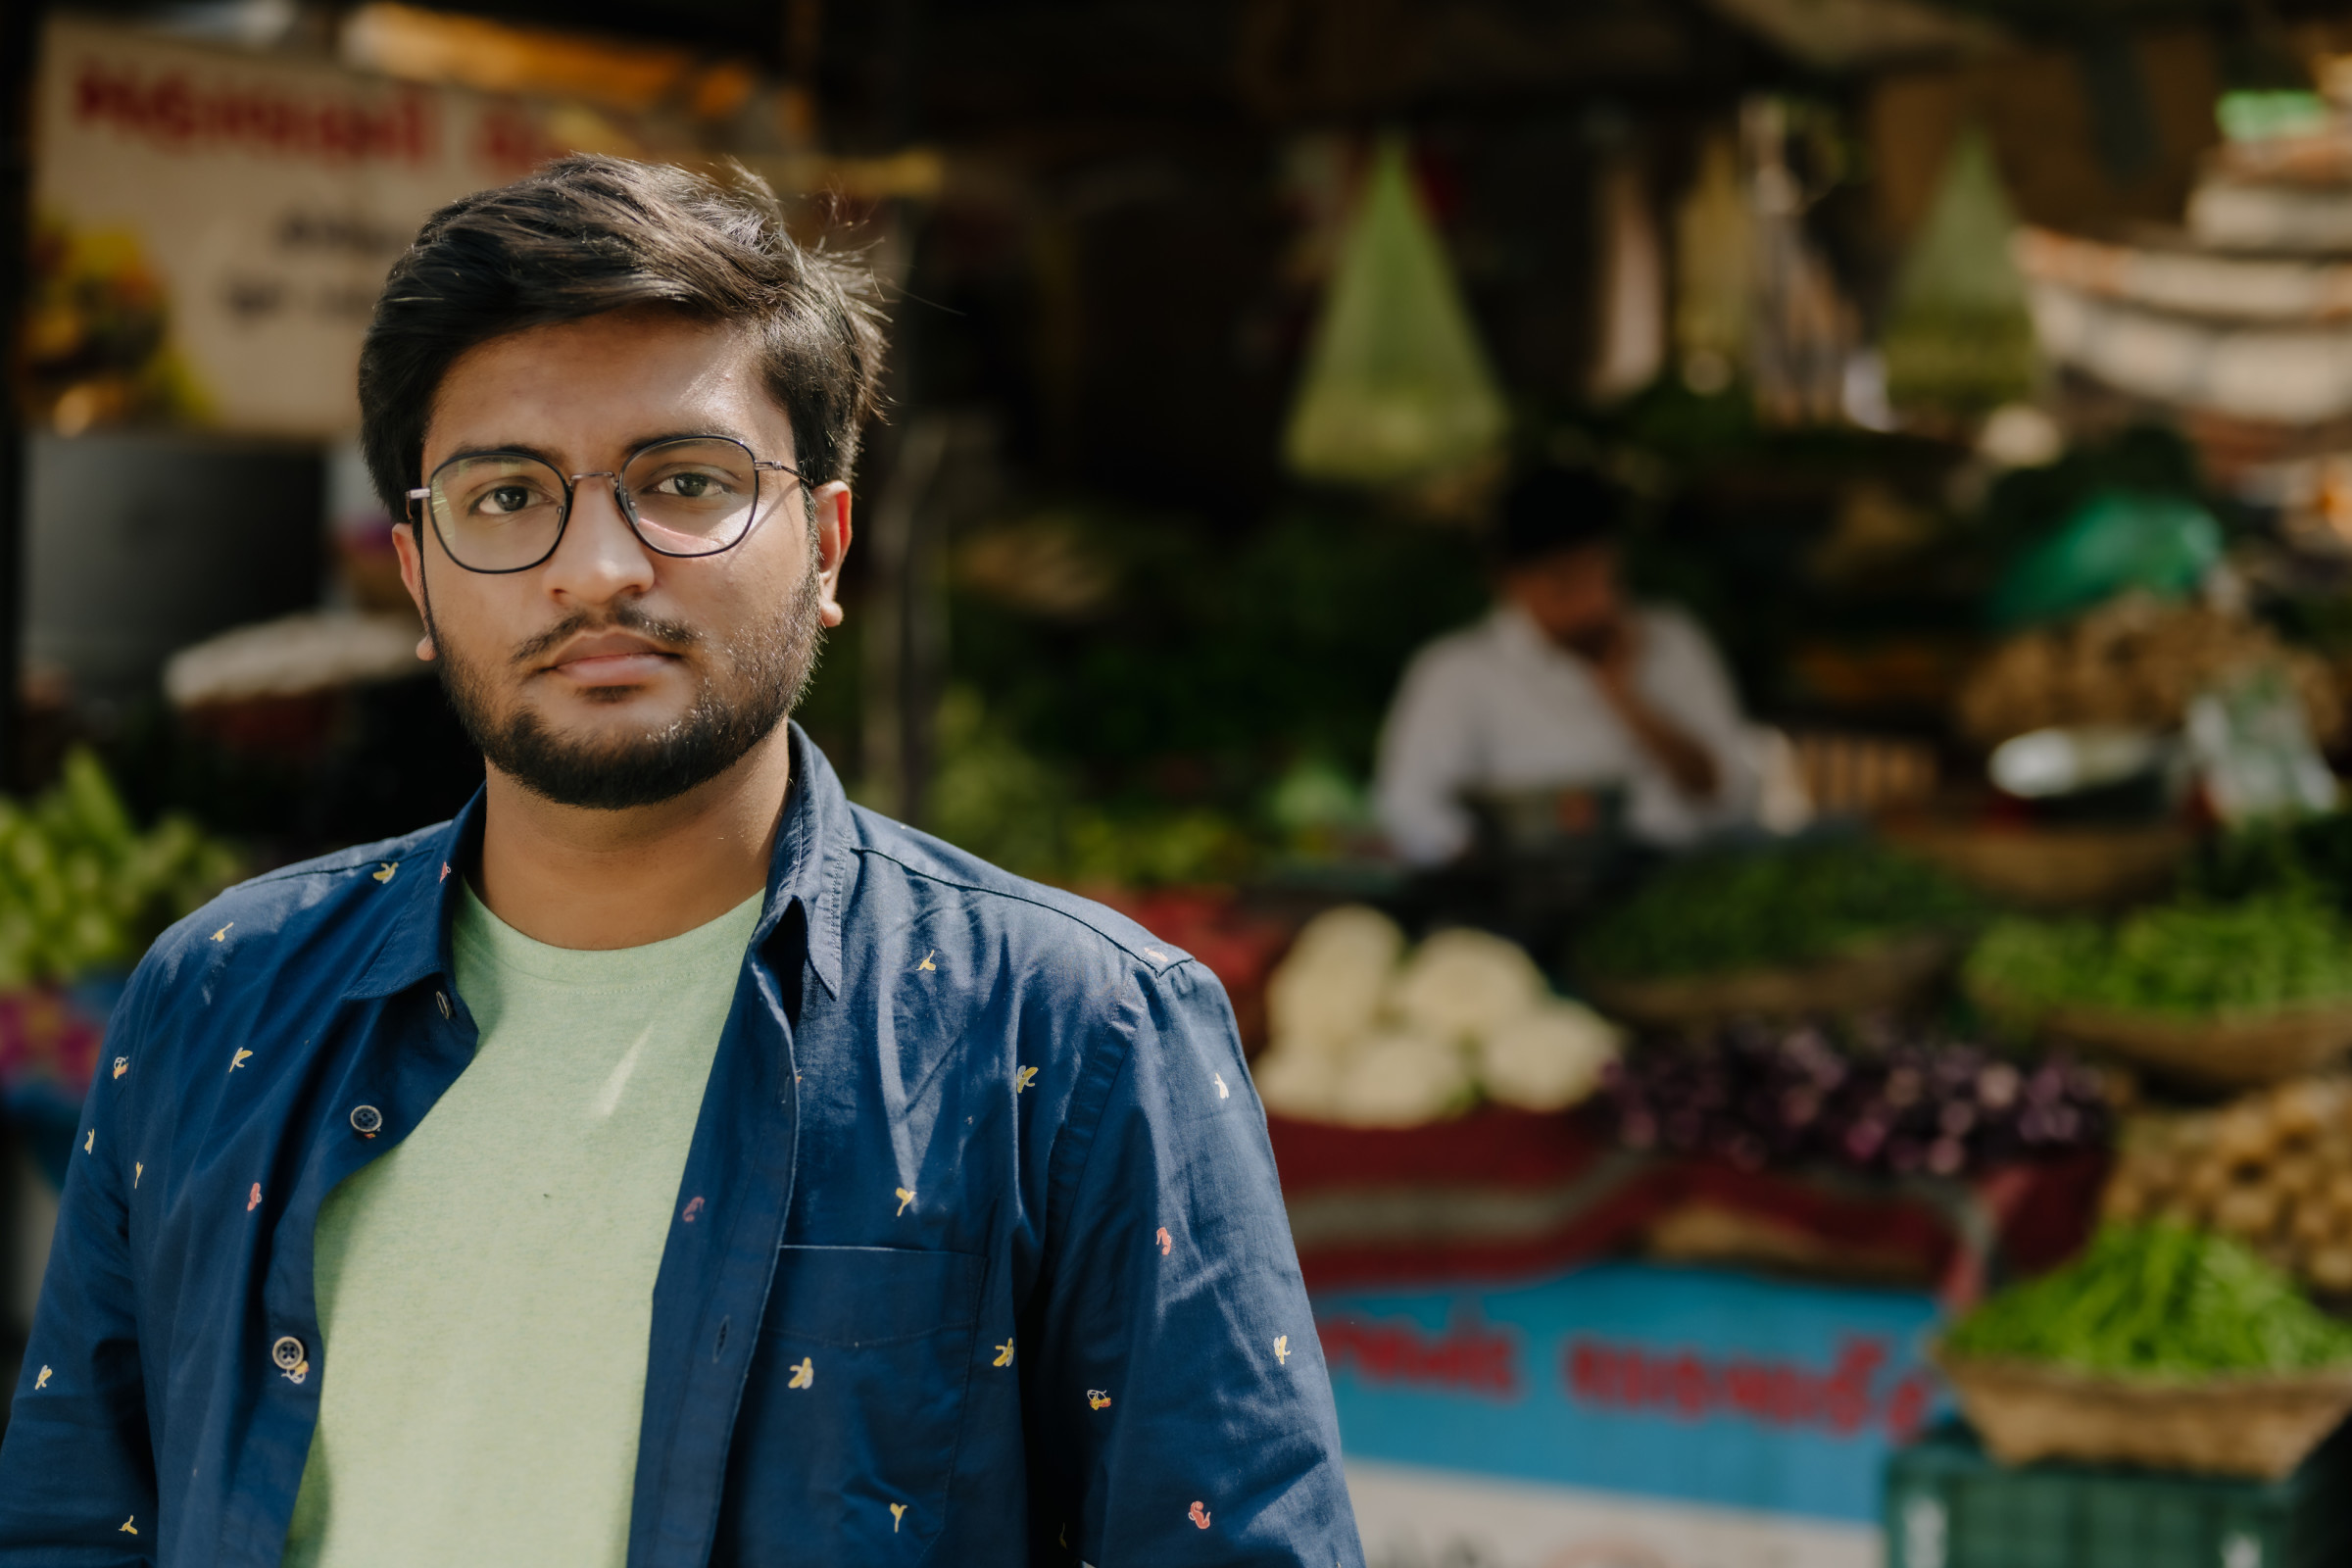 Author Karthik standing in front of an outdoor food market